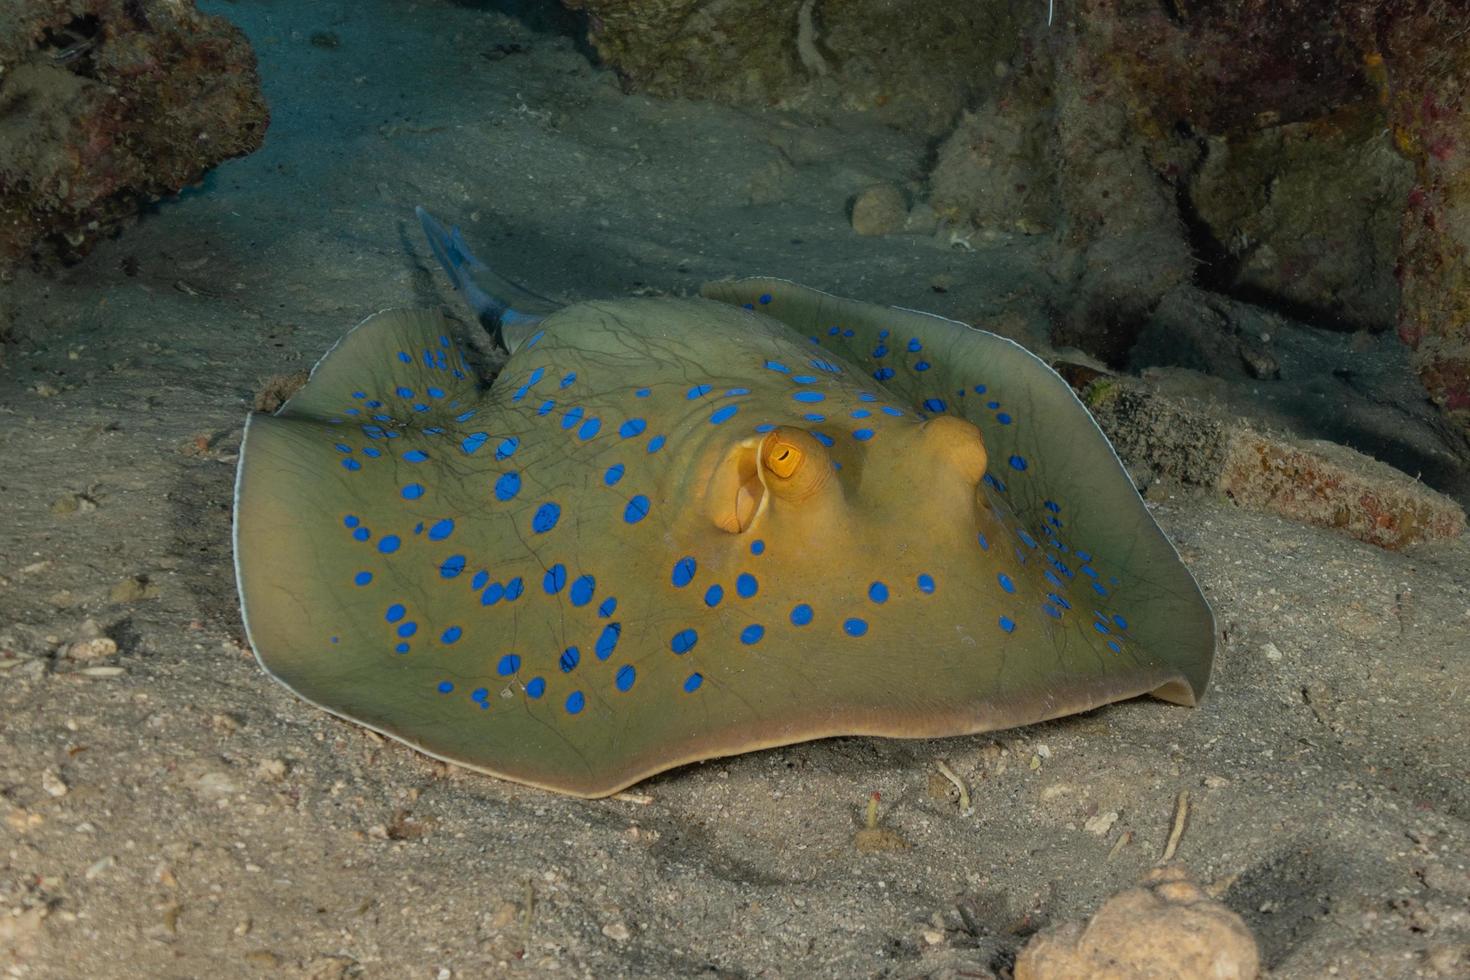 Blue spotted stingray On the seabed  in the Red Sea photo